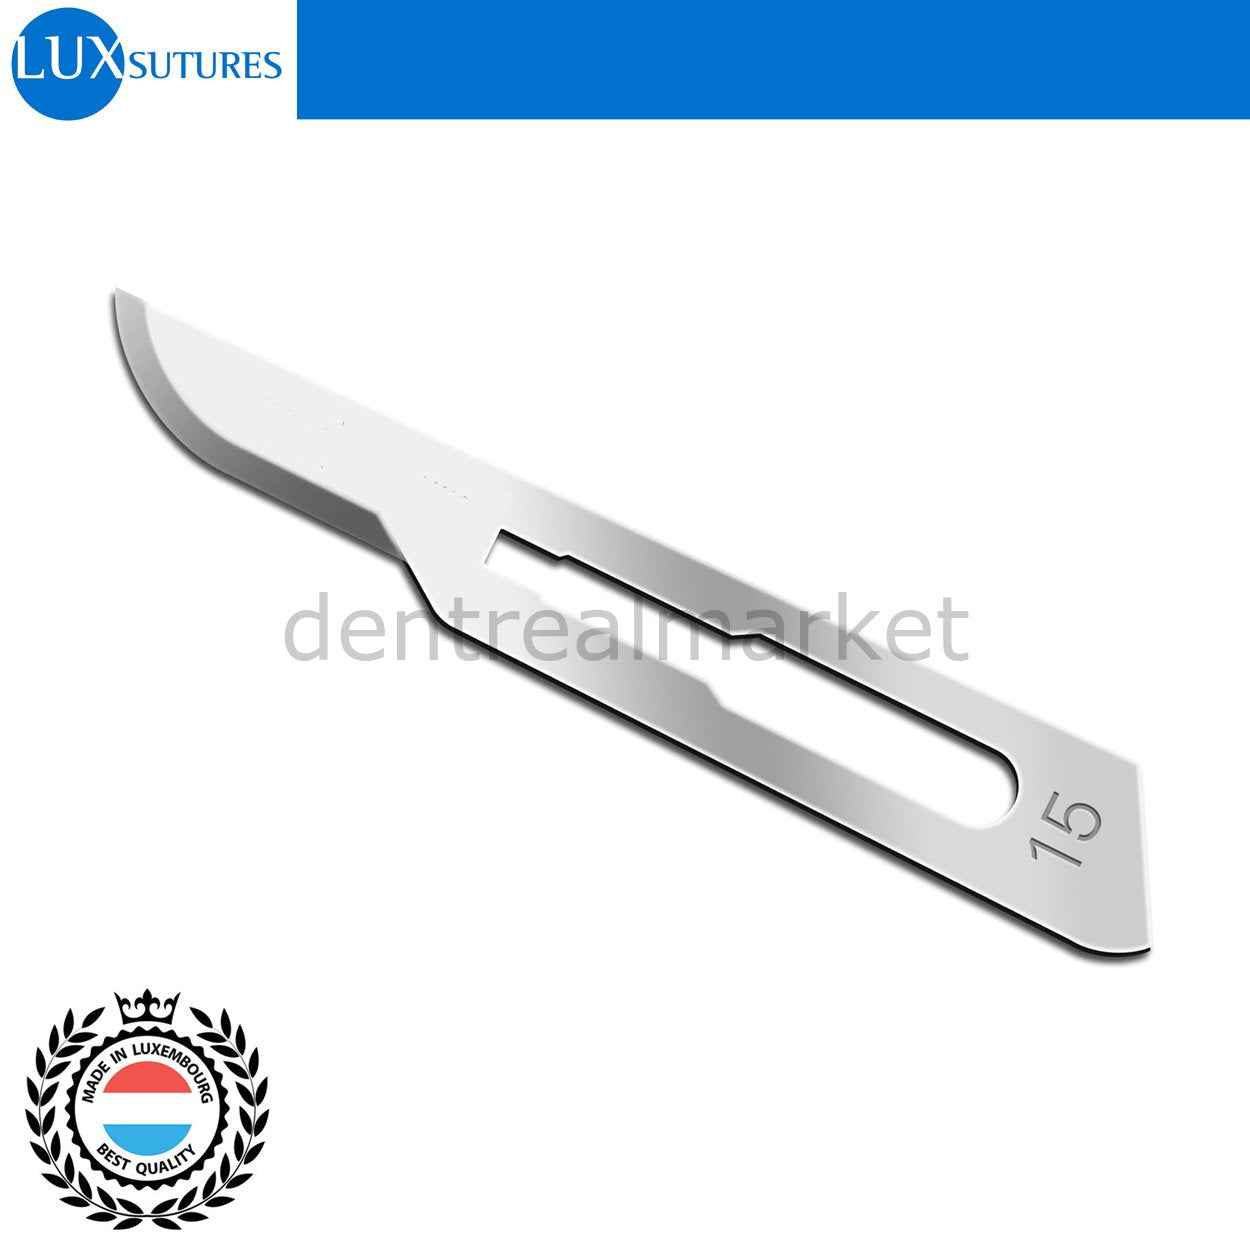 DentrealStore - LuxSutures Surgical Scalpel Sterile Blades Tip 15 - 5 Box Surgical Blade